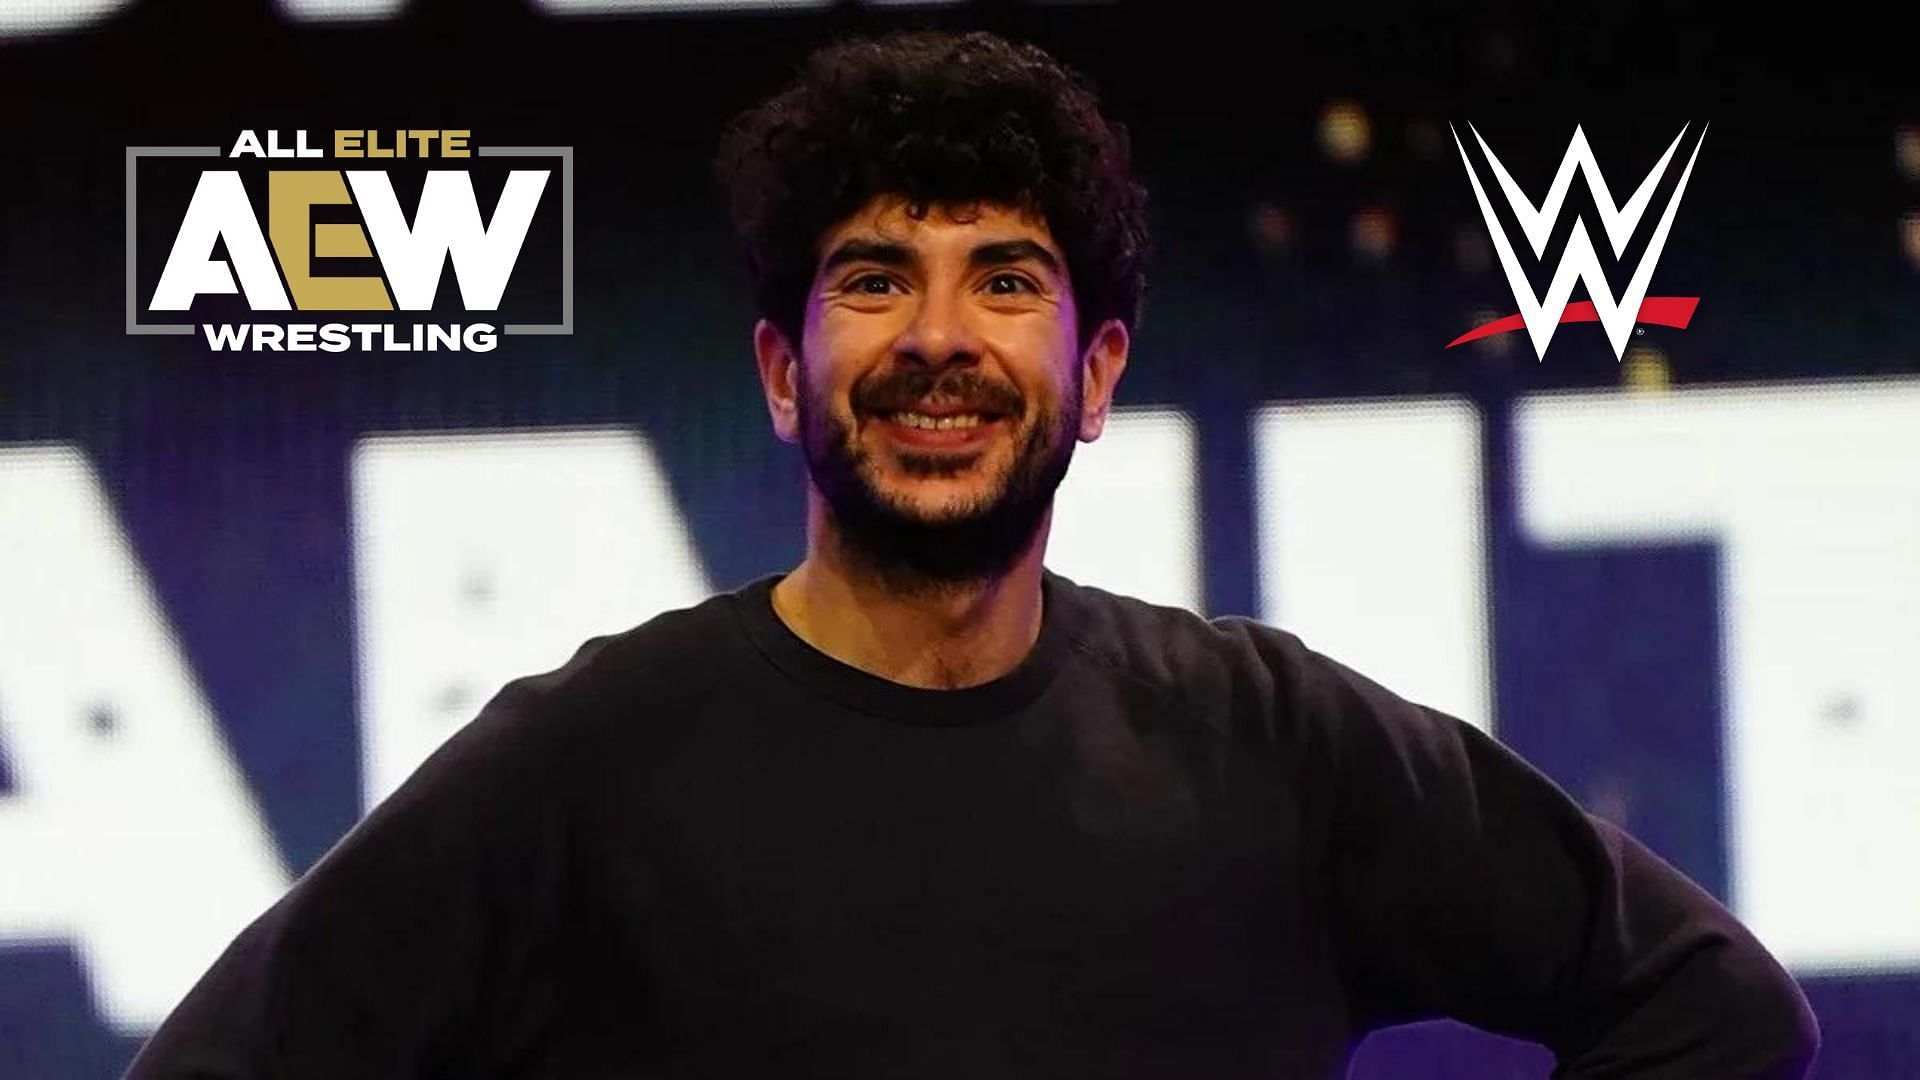 Another former WWE Superstar seemingly hints at a move to Tony Khan's AEW